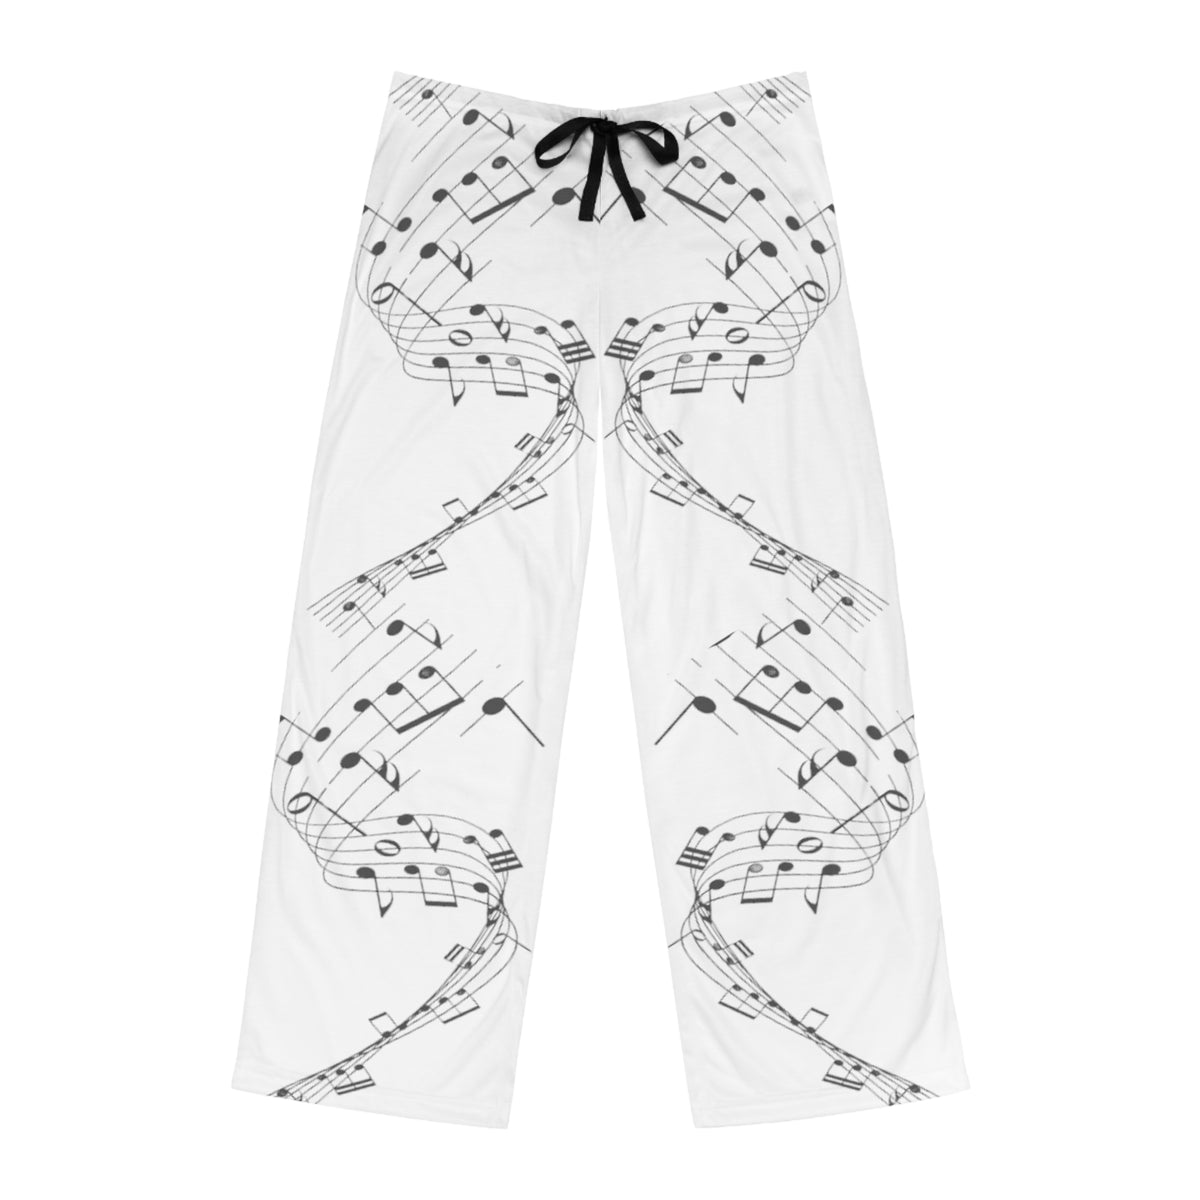 Melodic Dreams White Pajama Pants with Black Music Notes